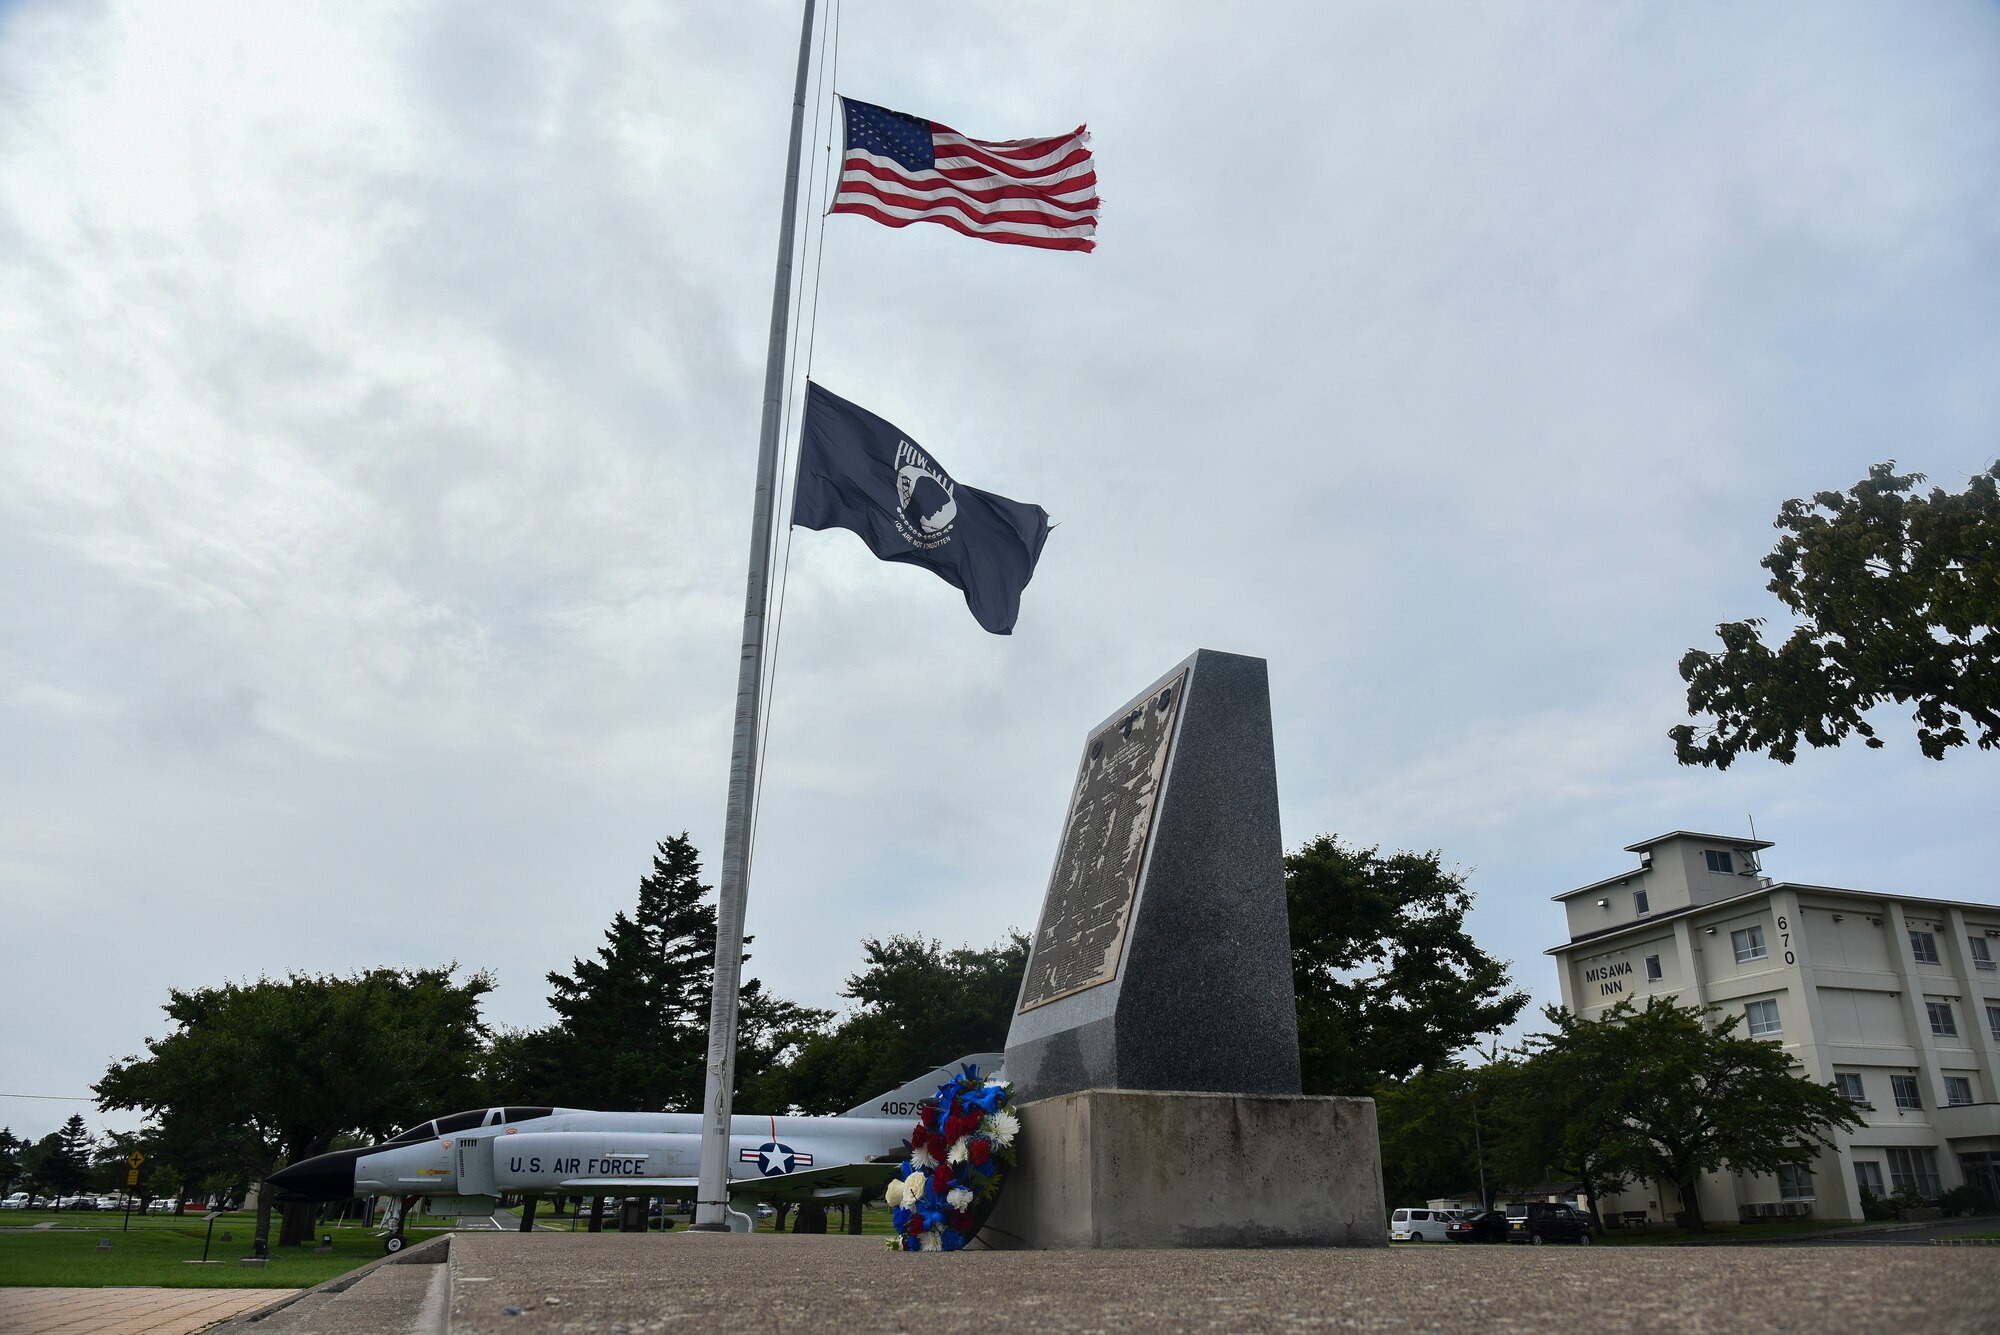 A ceremonial wreath lays in front of the Medal of Honor recipient’s memorial.